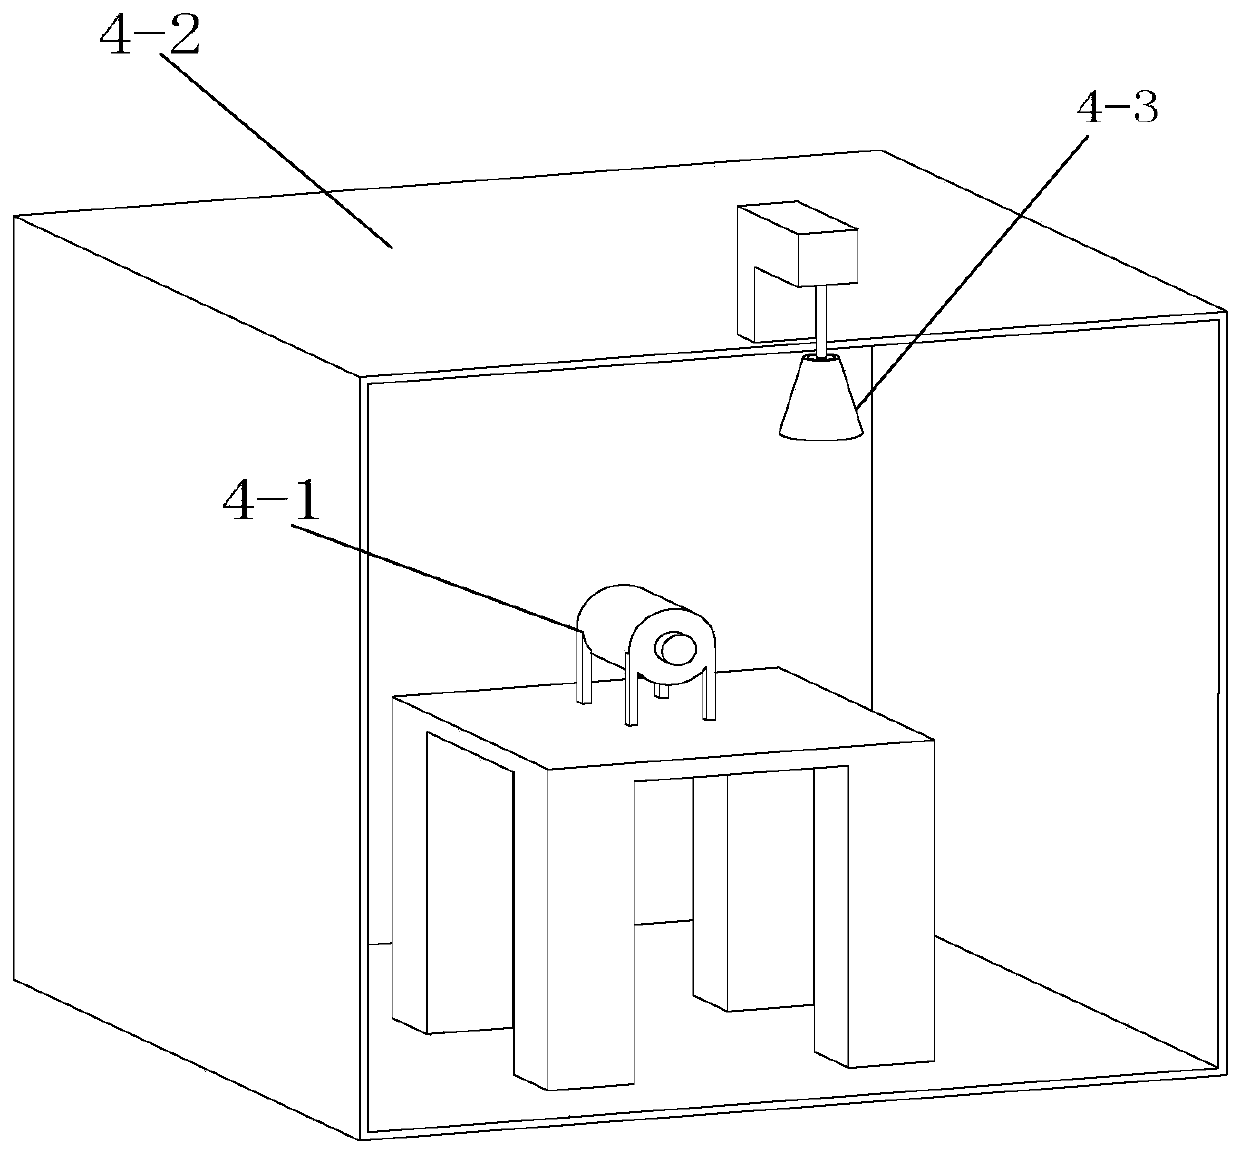 A device and method for automatic height adjustment of a shearer drum based on image recognition